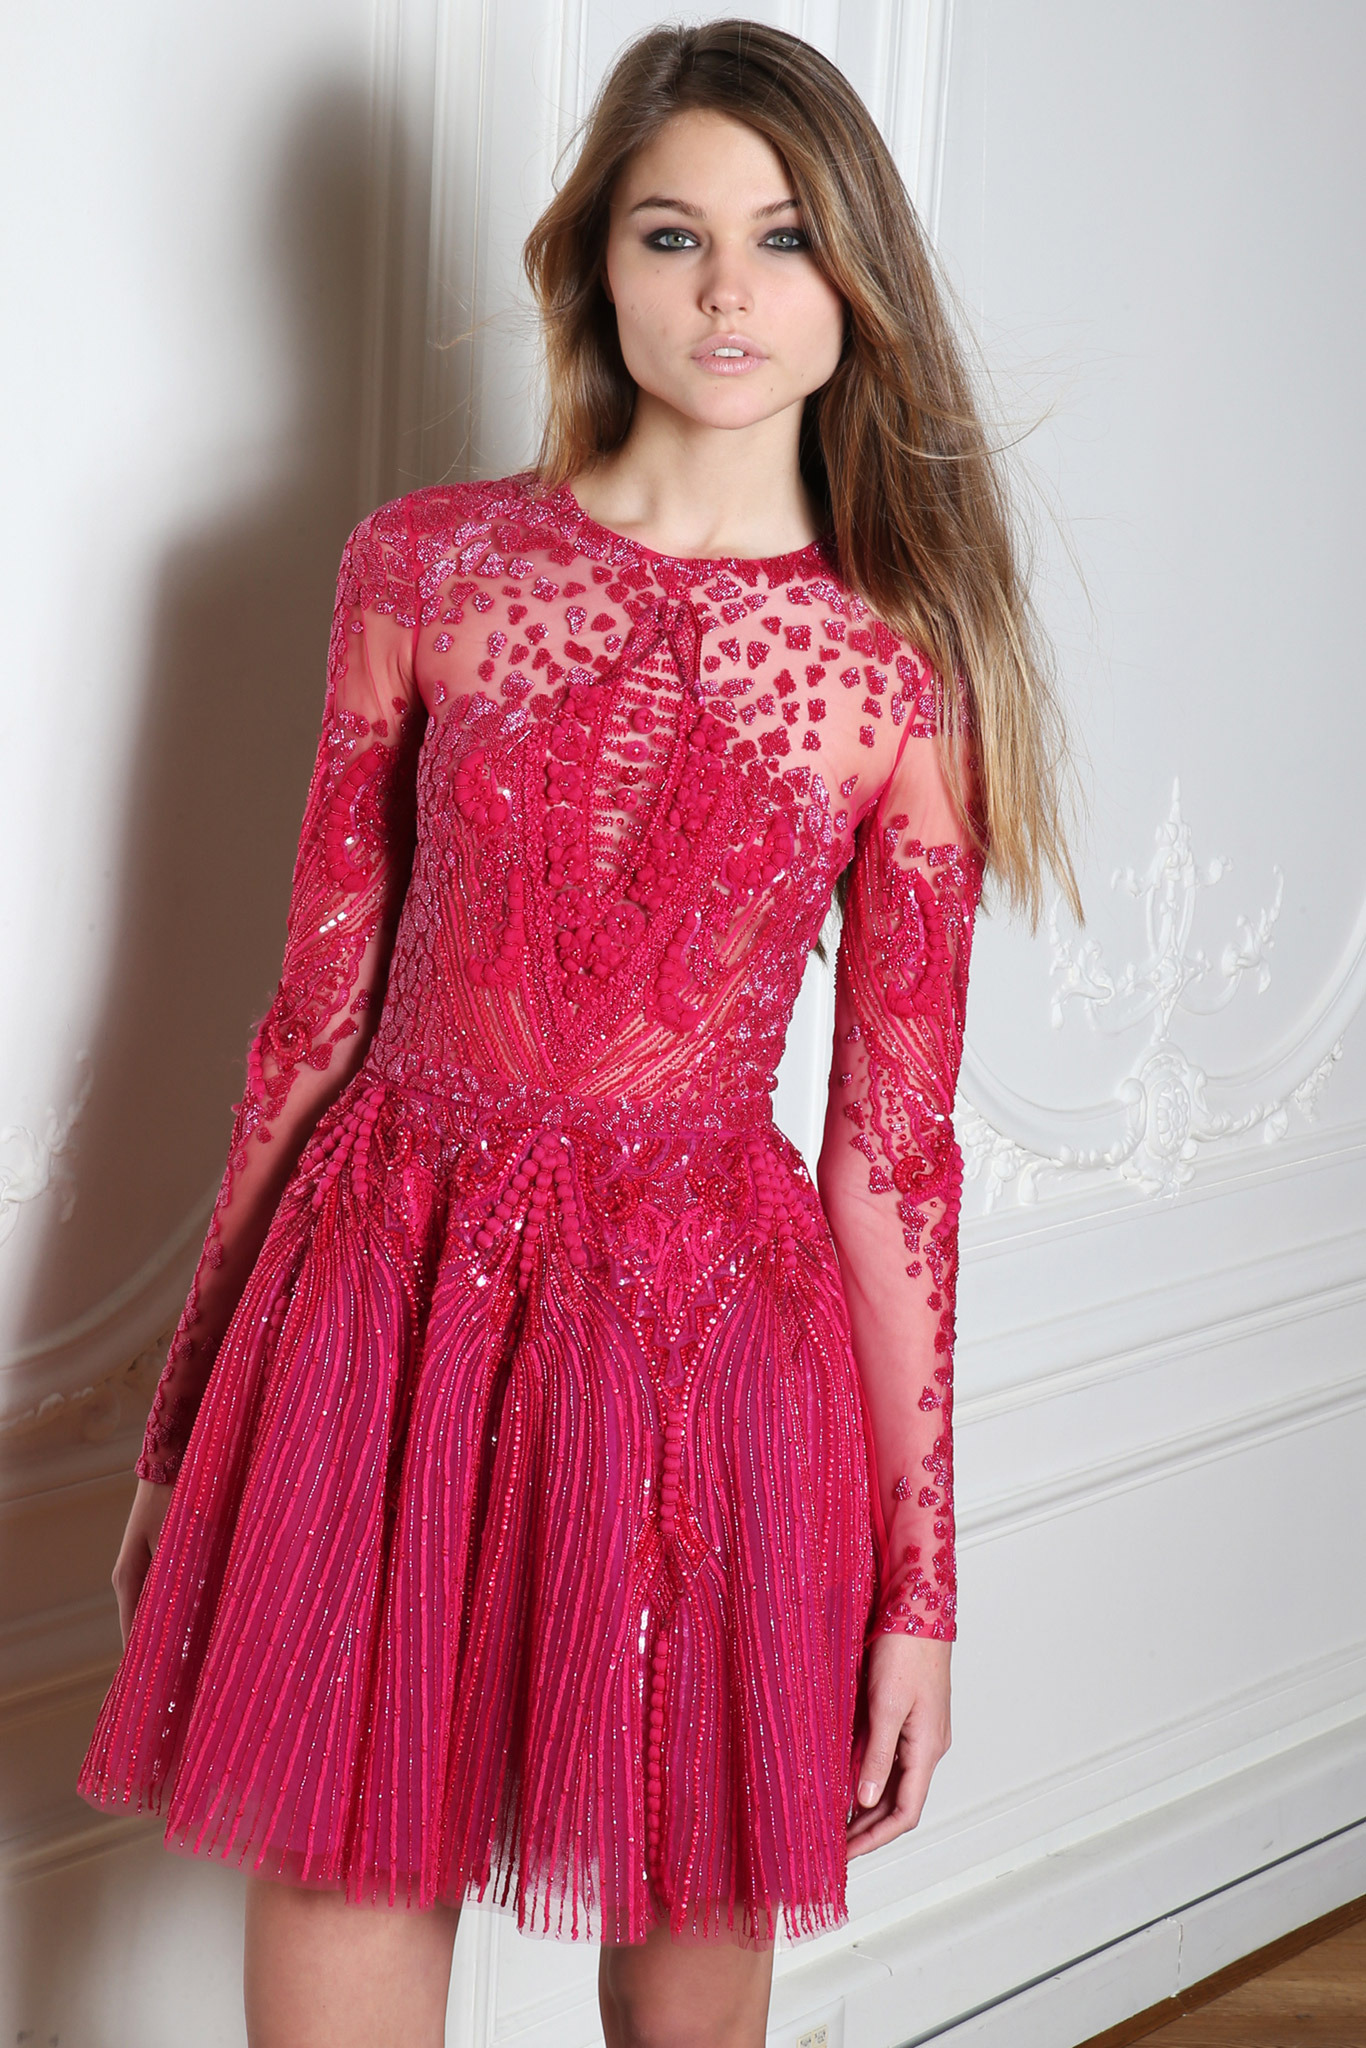 Zuhair Murad Fall/Winter 2014/2015 Ready to Wear Collection